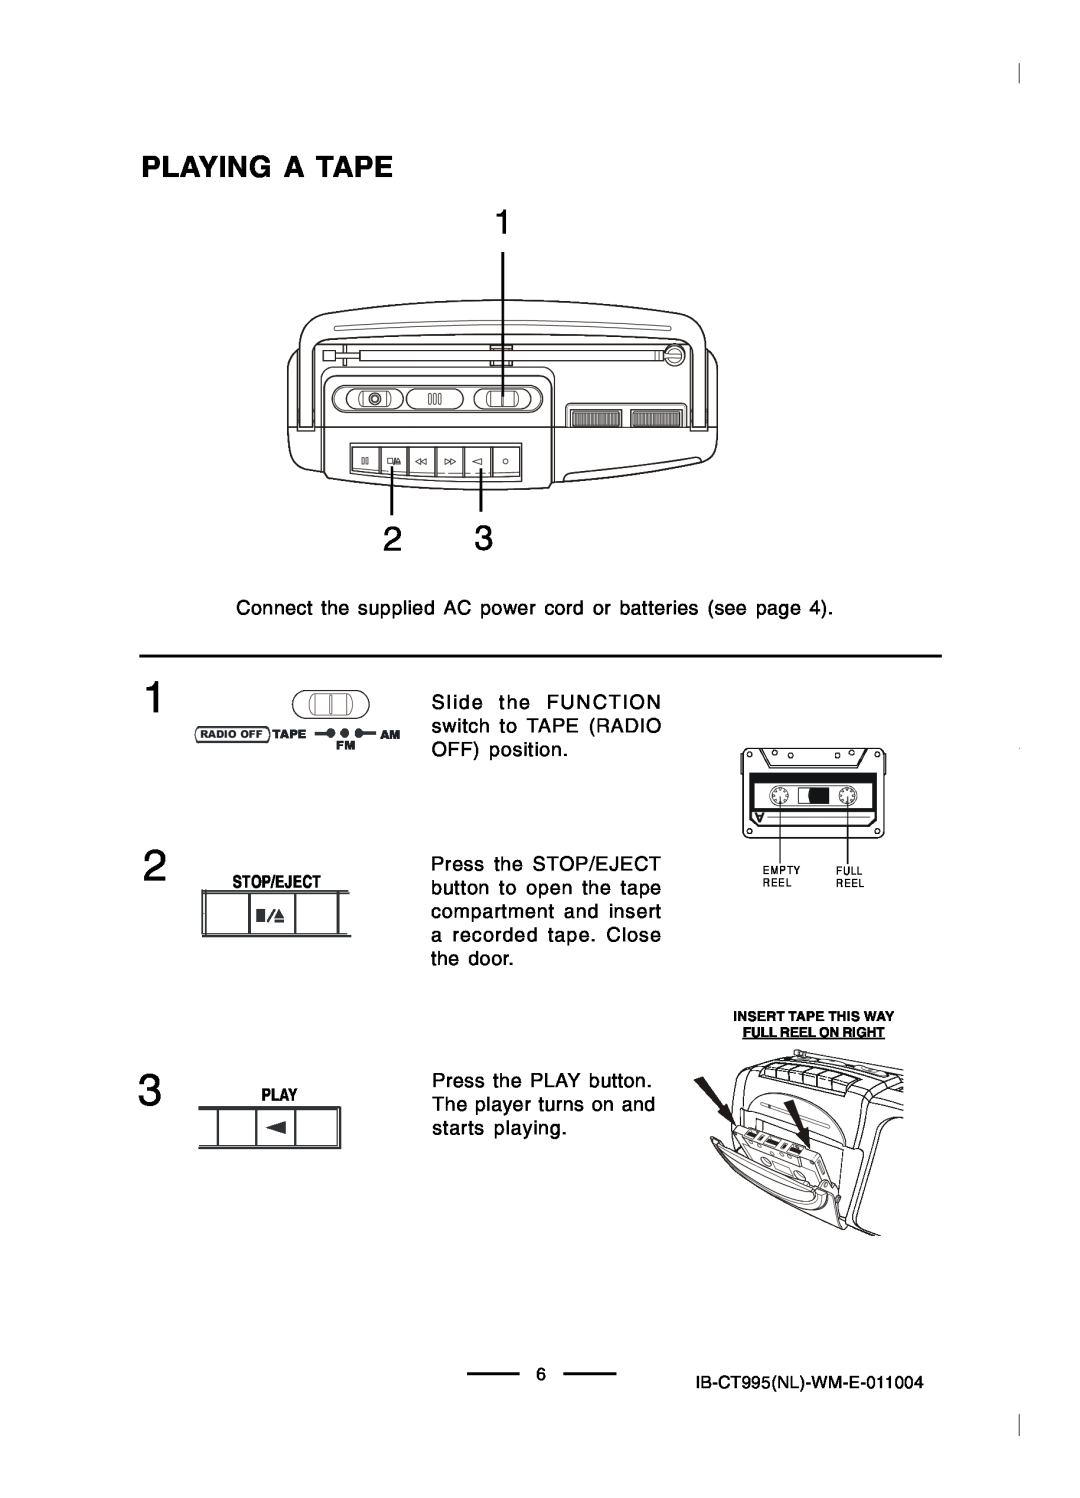 Lenoxx Electronics CT-995 operating instructions Playing A Tape, Slide the FUNCTION, AM switch to TAPE RADIO, OFF position 